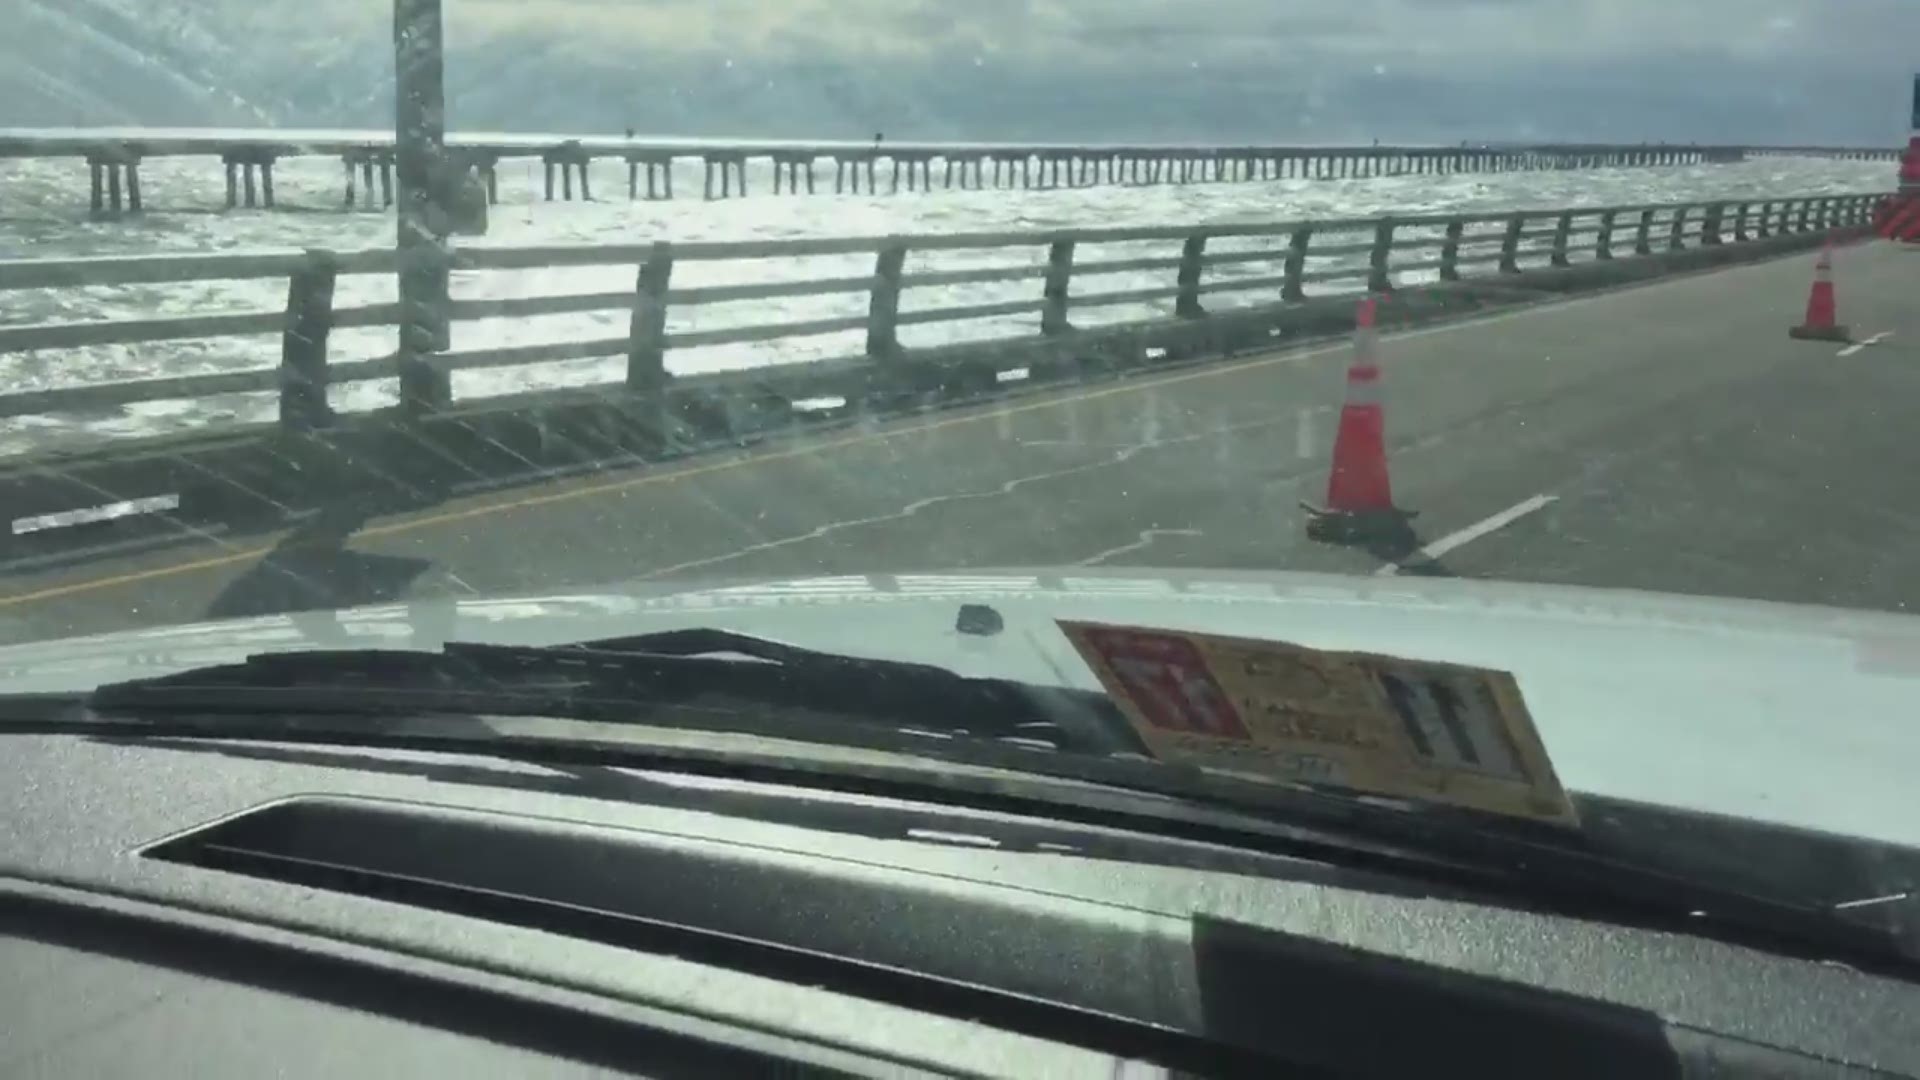 Railing partially torn off of Southbound lane on CBBT. There also appears to be debris in the road.  Video shot by Steven Graves